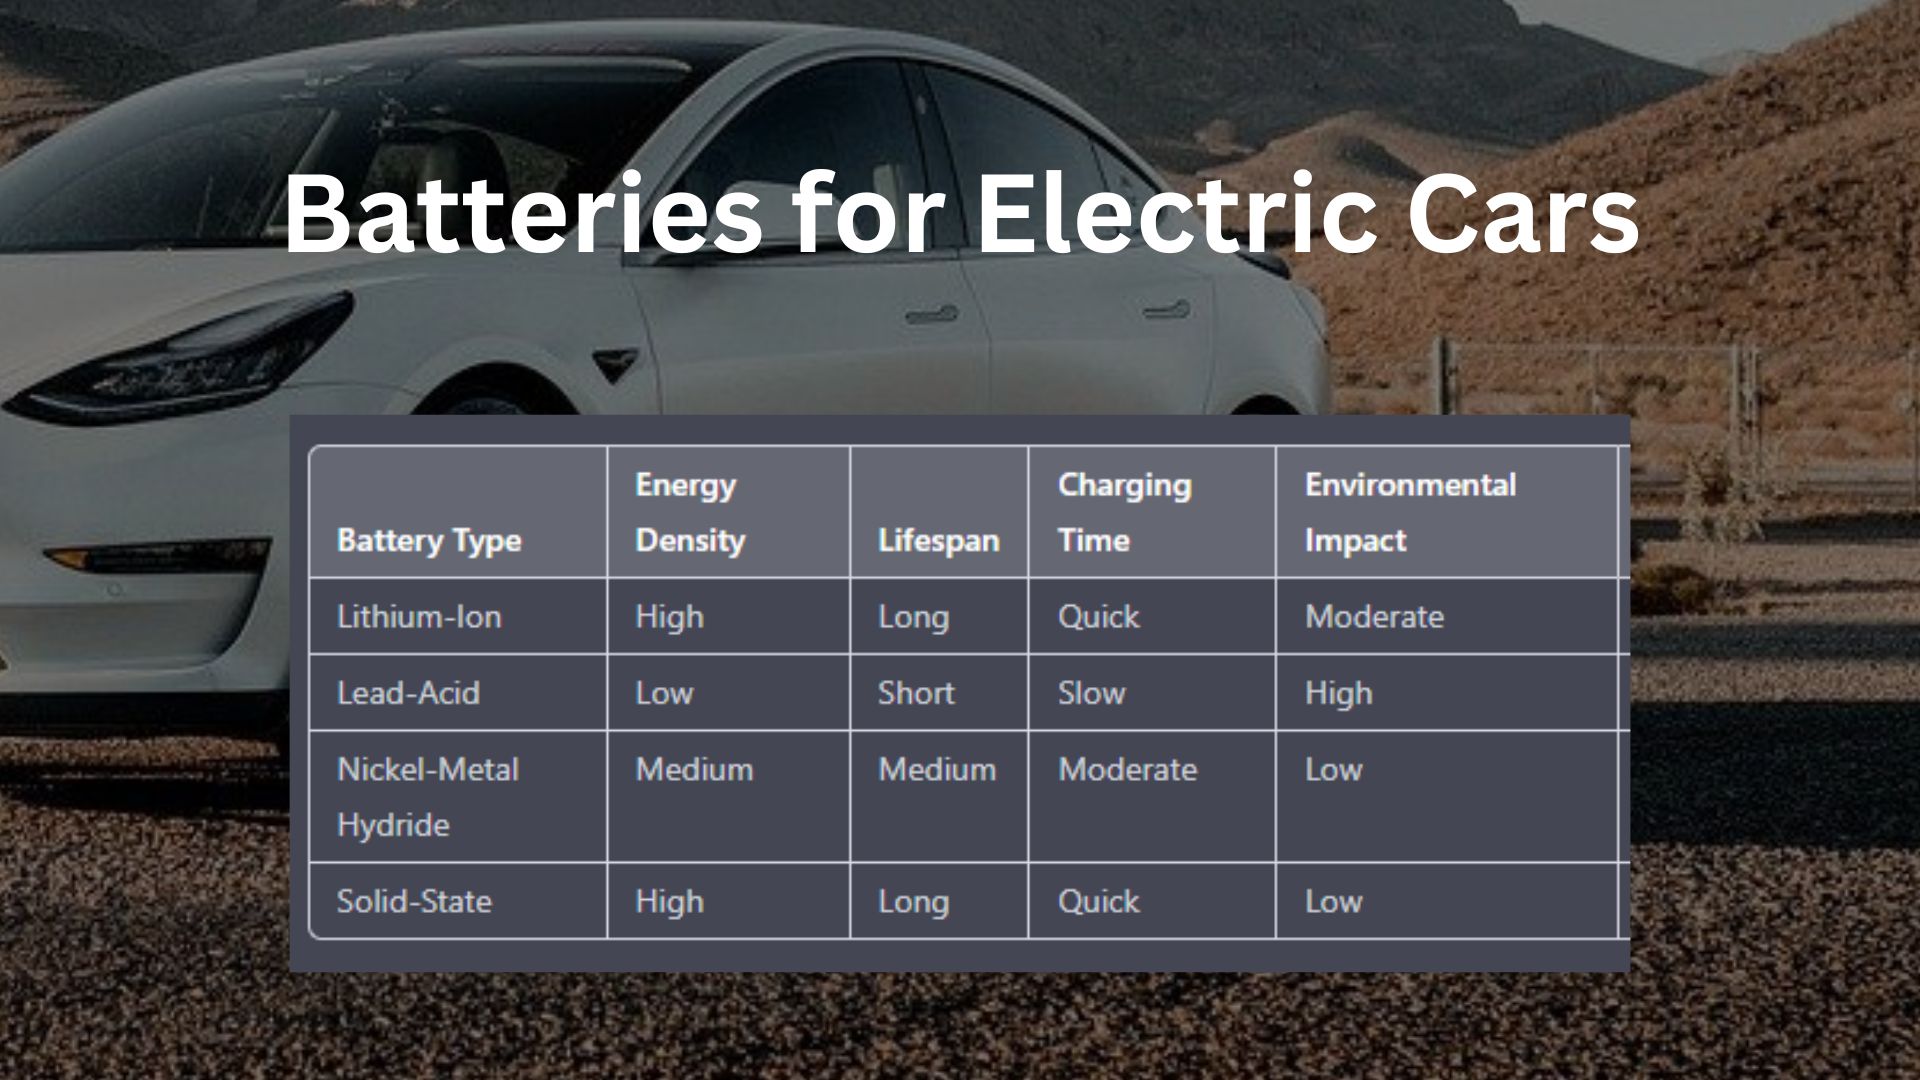 Batteries for Electric Cars